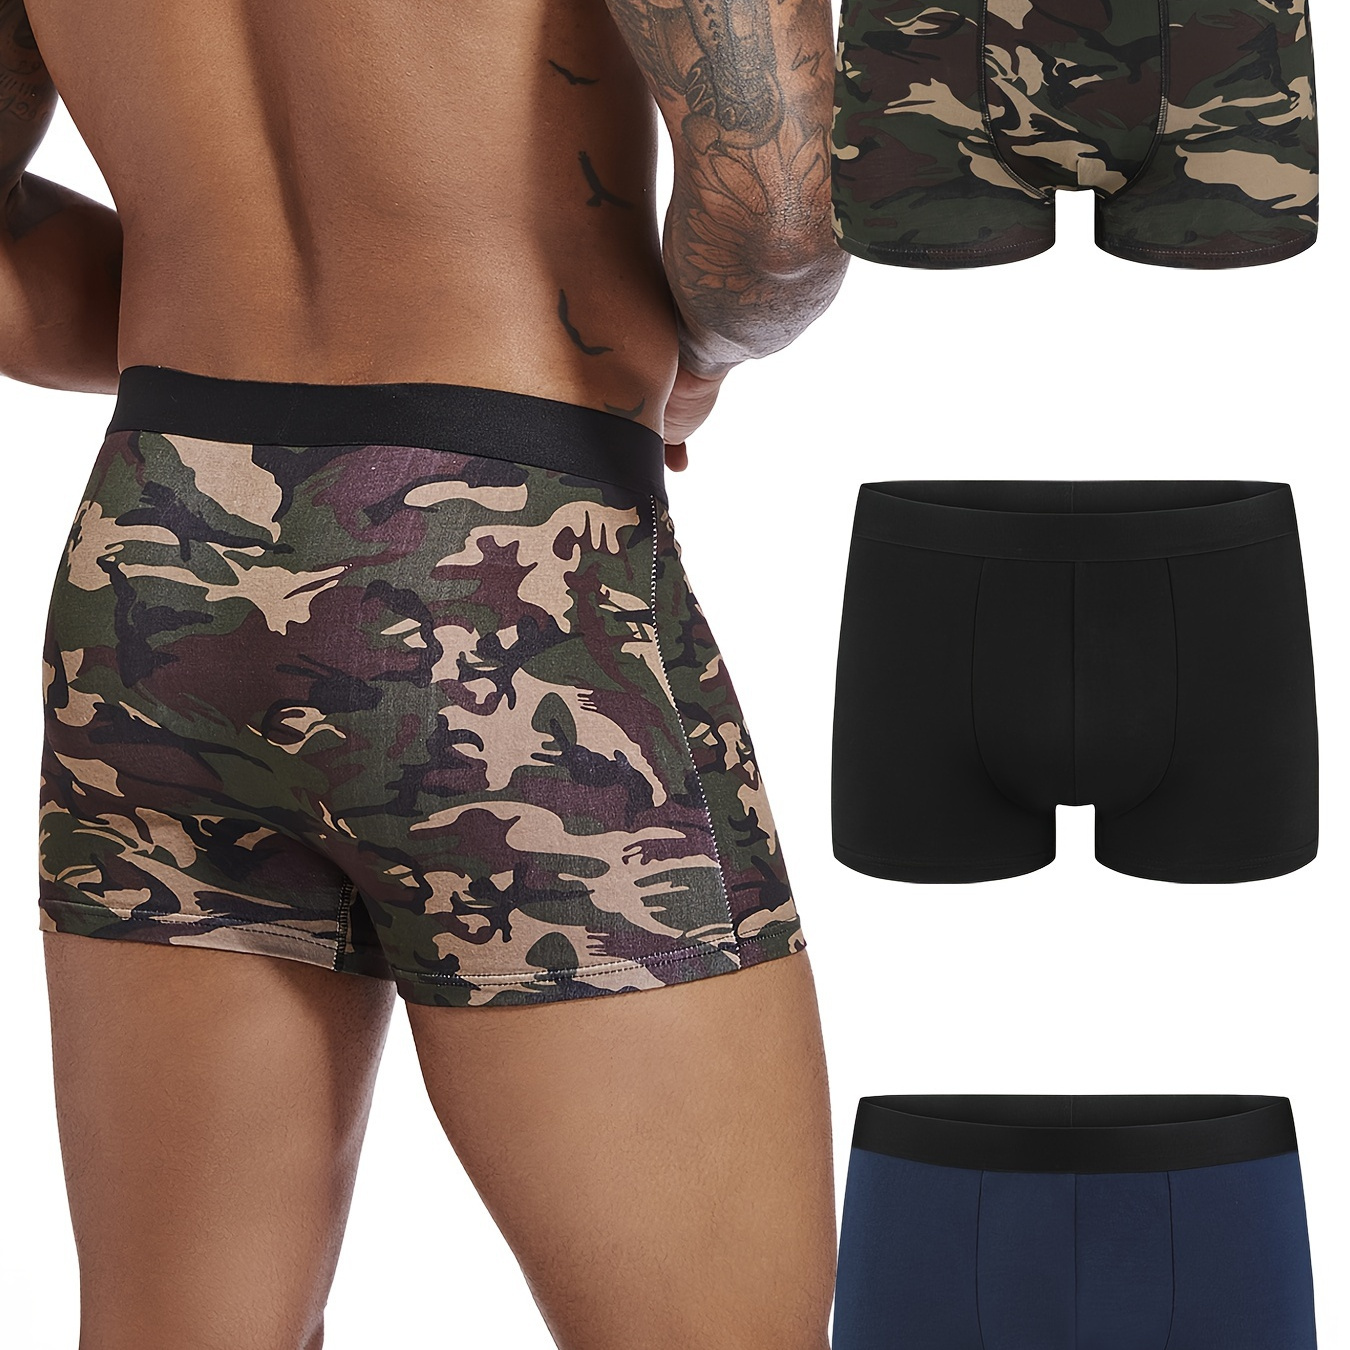 

3pcs Camouflage Print Men's Sexy Underwear, Breathable Soft Comfy Stretchy Boxer Briefs Shorts, Casual Home Underpants For Male